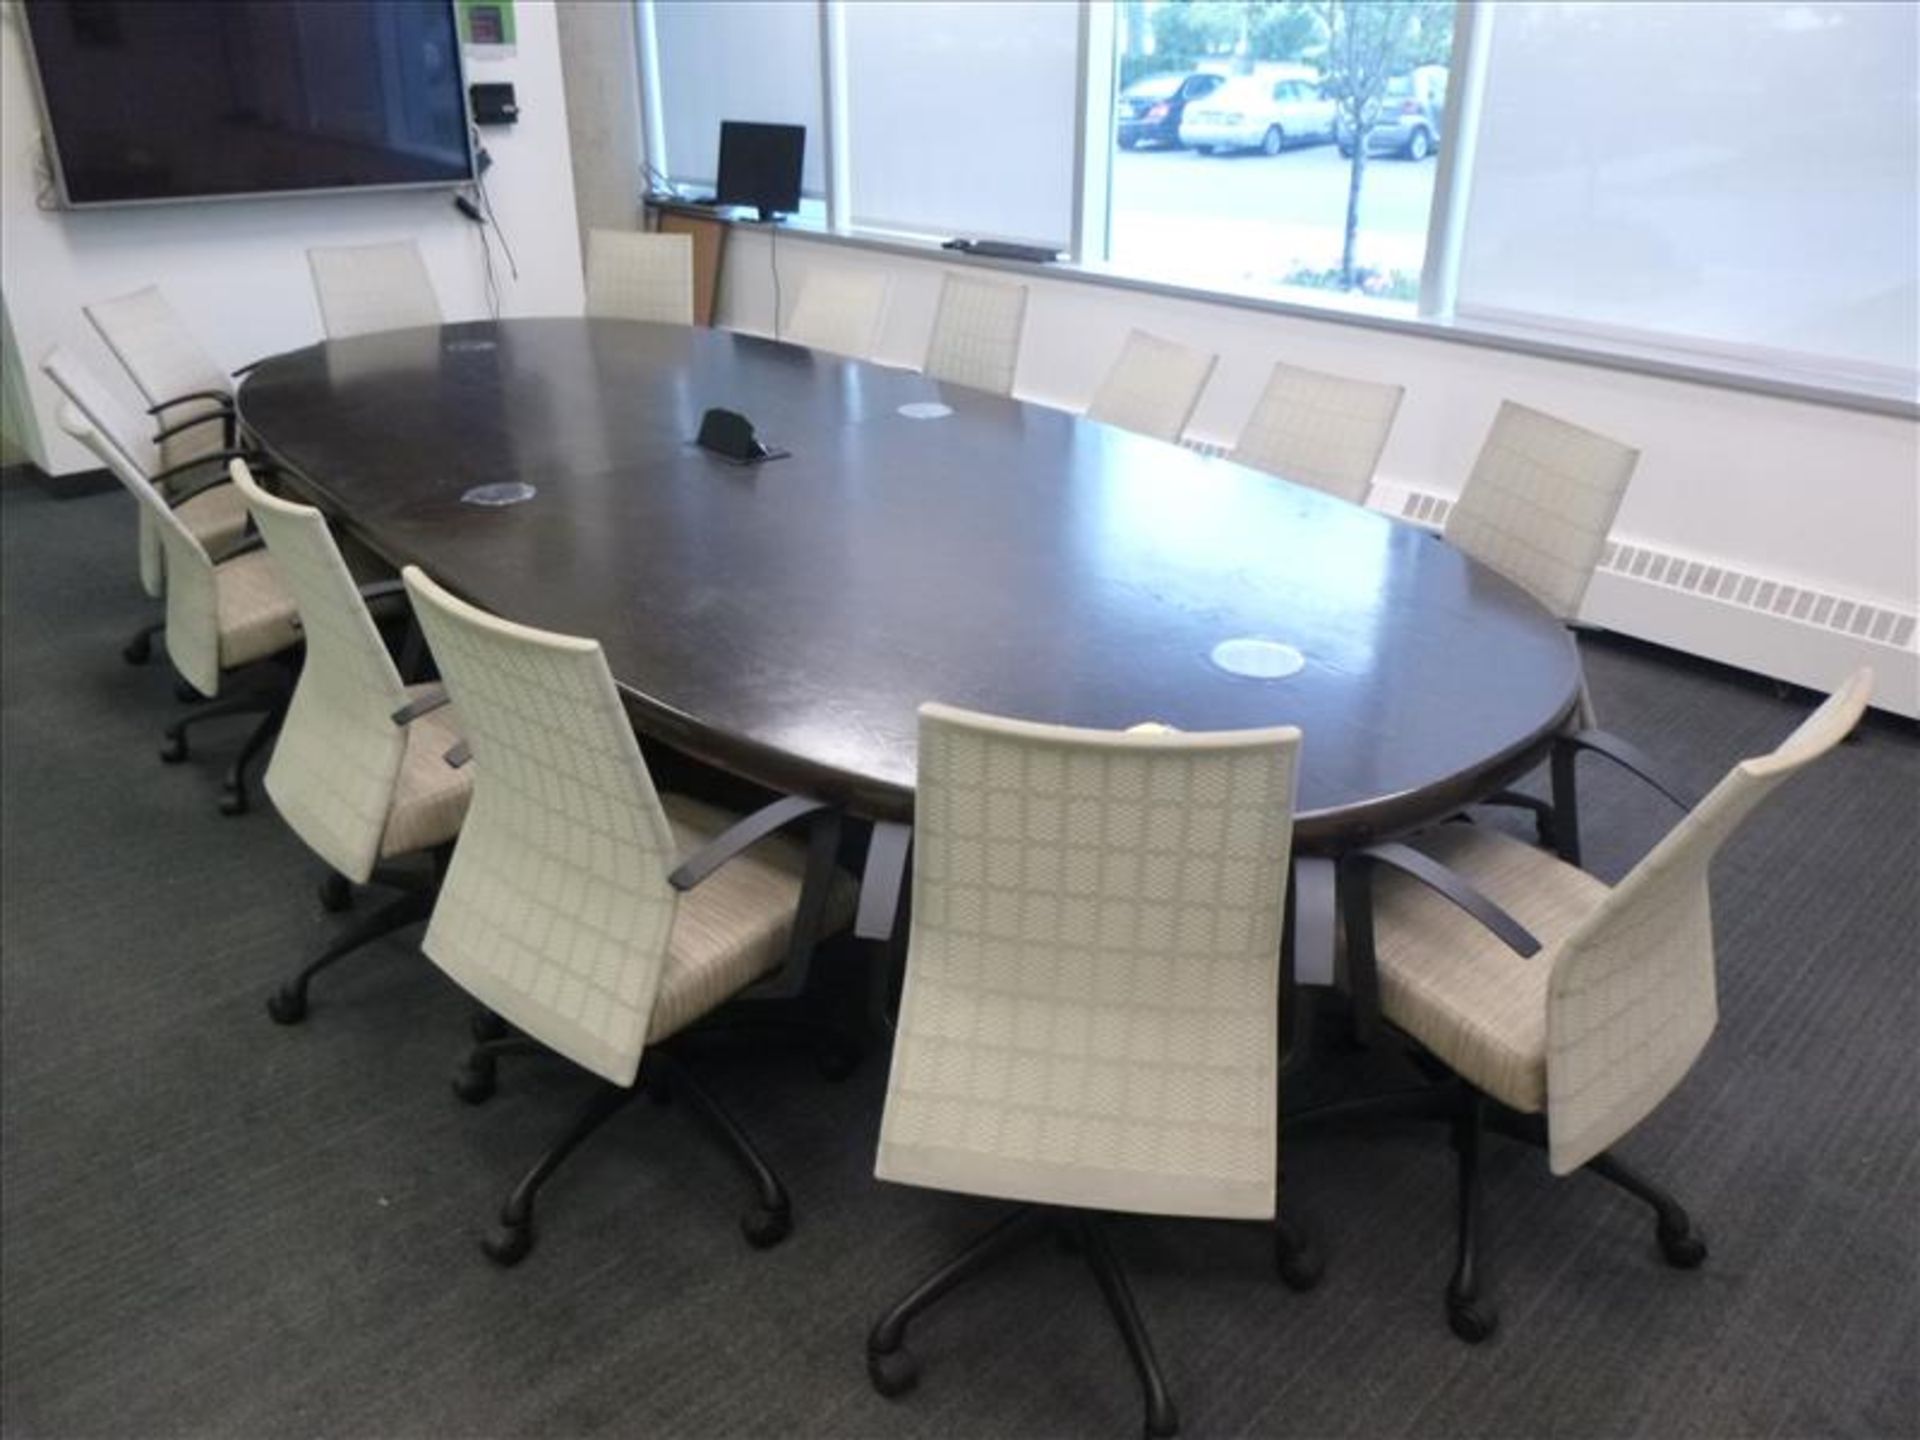 board room table, 70" x 14' c/w (14) chairs [1]